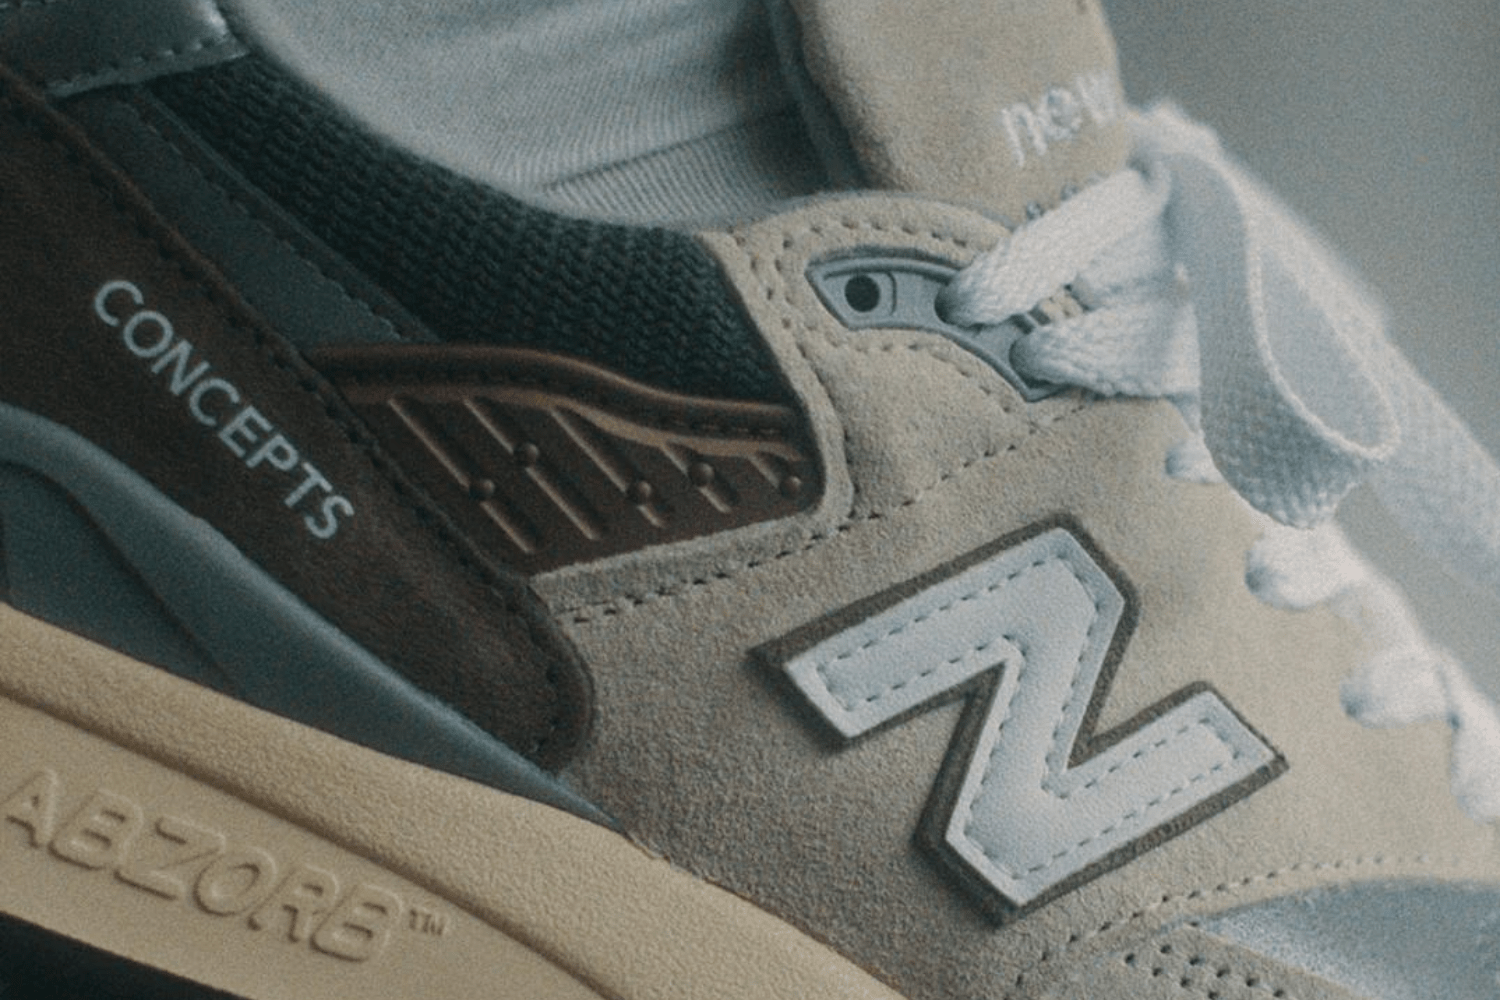 The Concepts x New Balance 998 'C-Note' returns in 2023